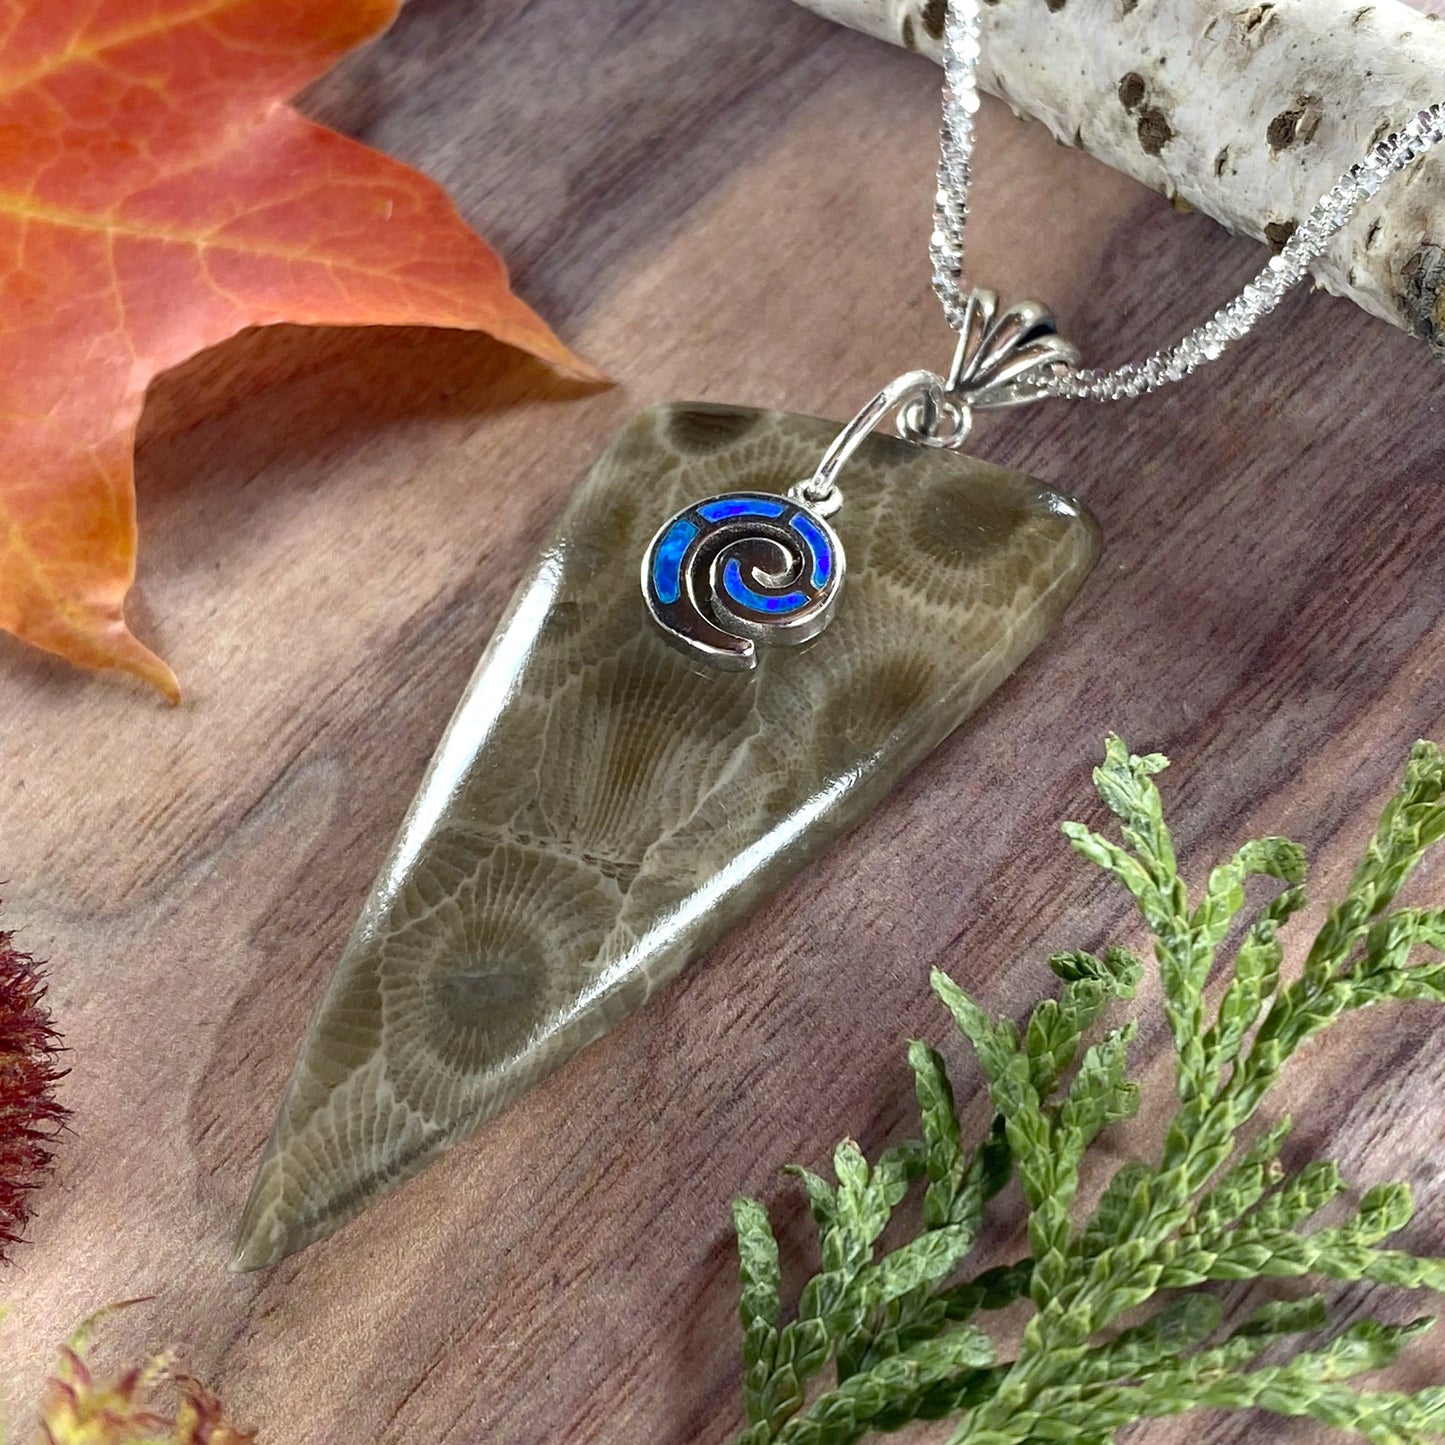 Petoskey Stone Swirl Charm Pendant Front View III - Stone Treasures by the Lake